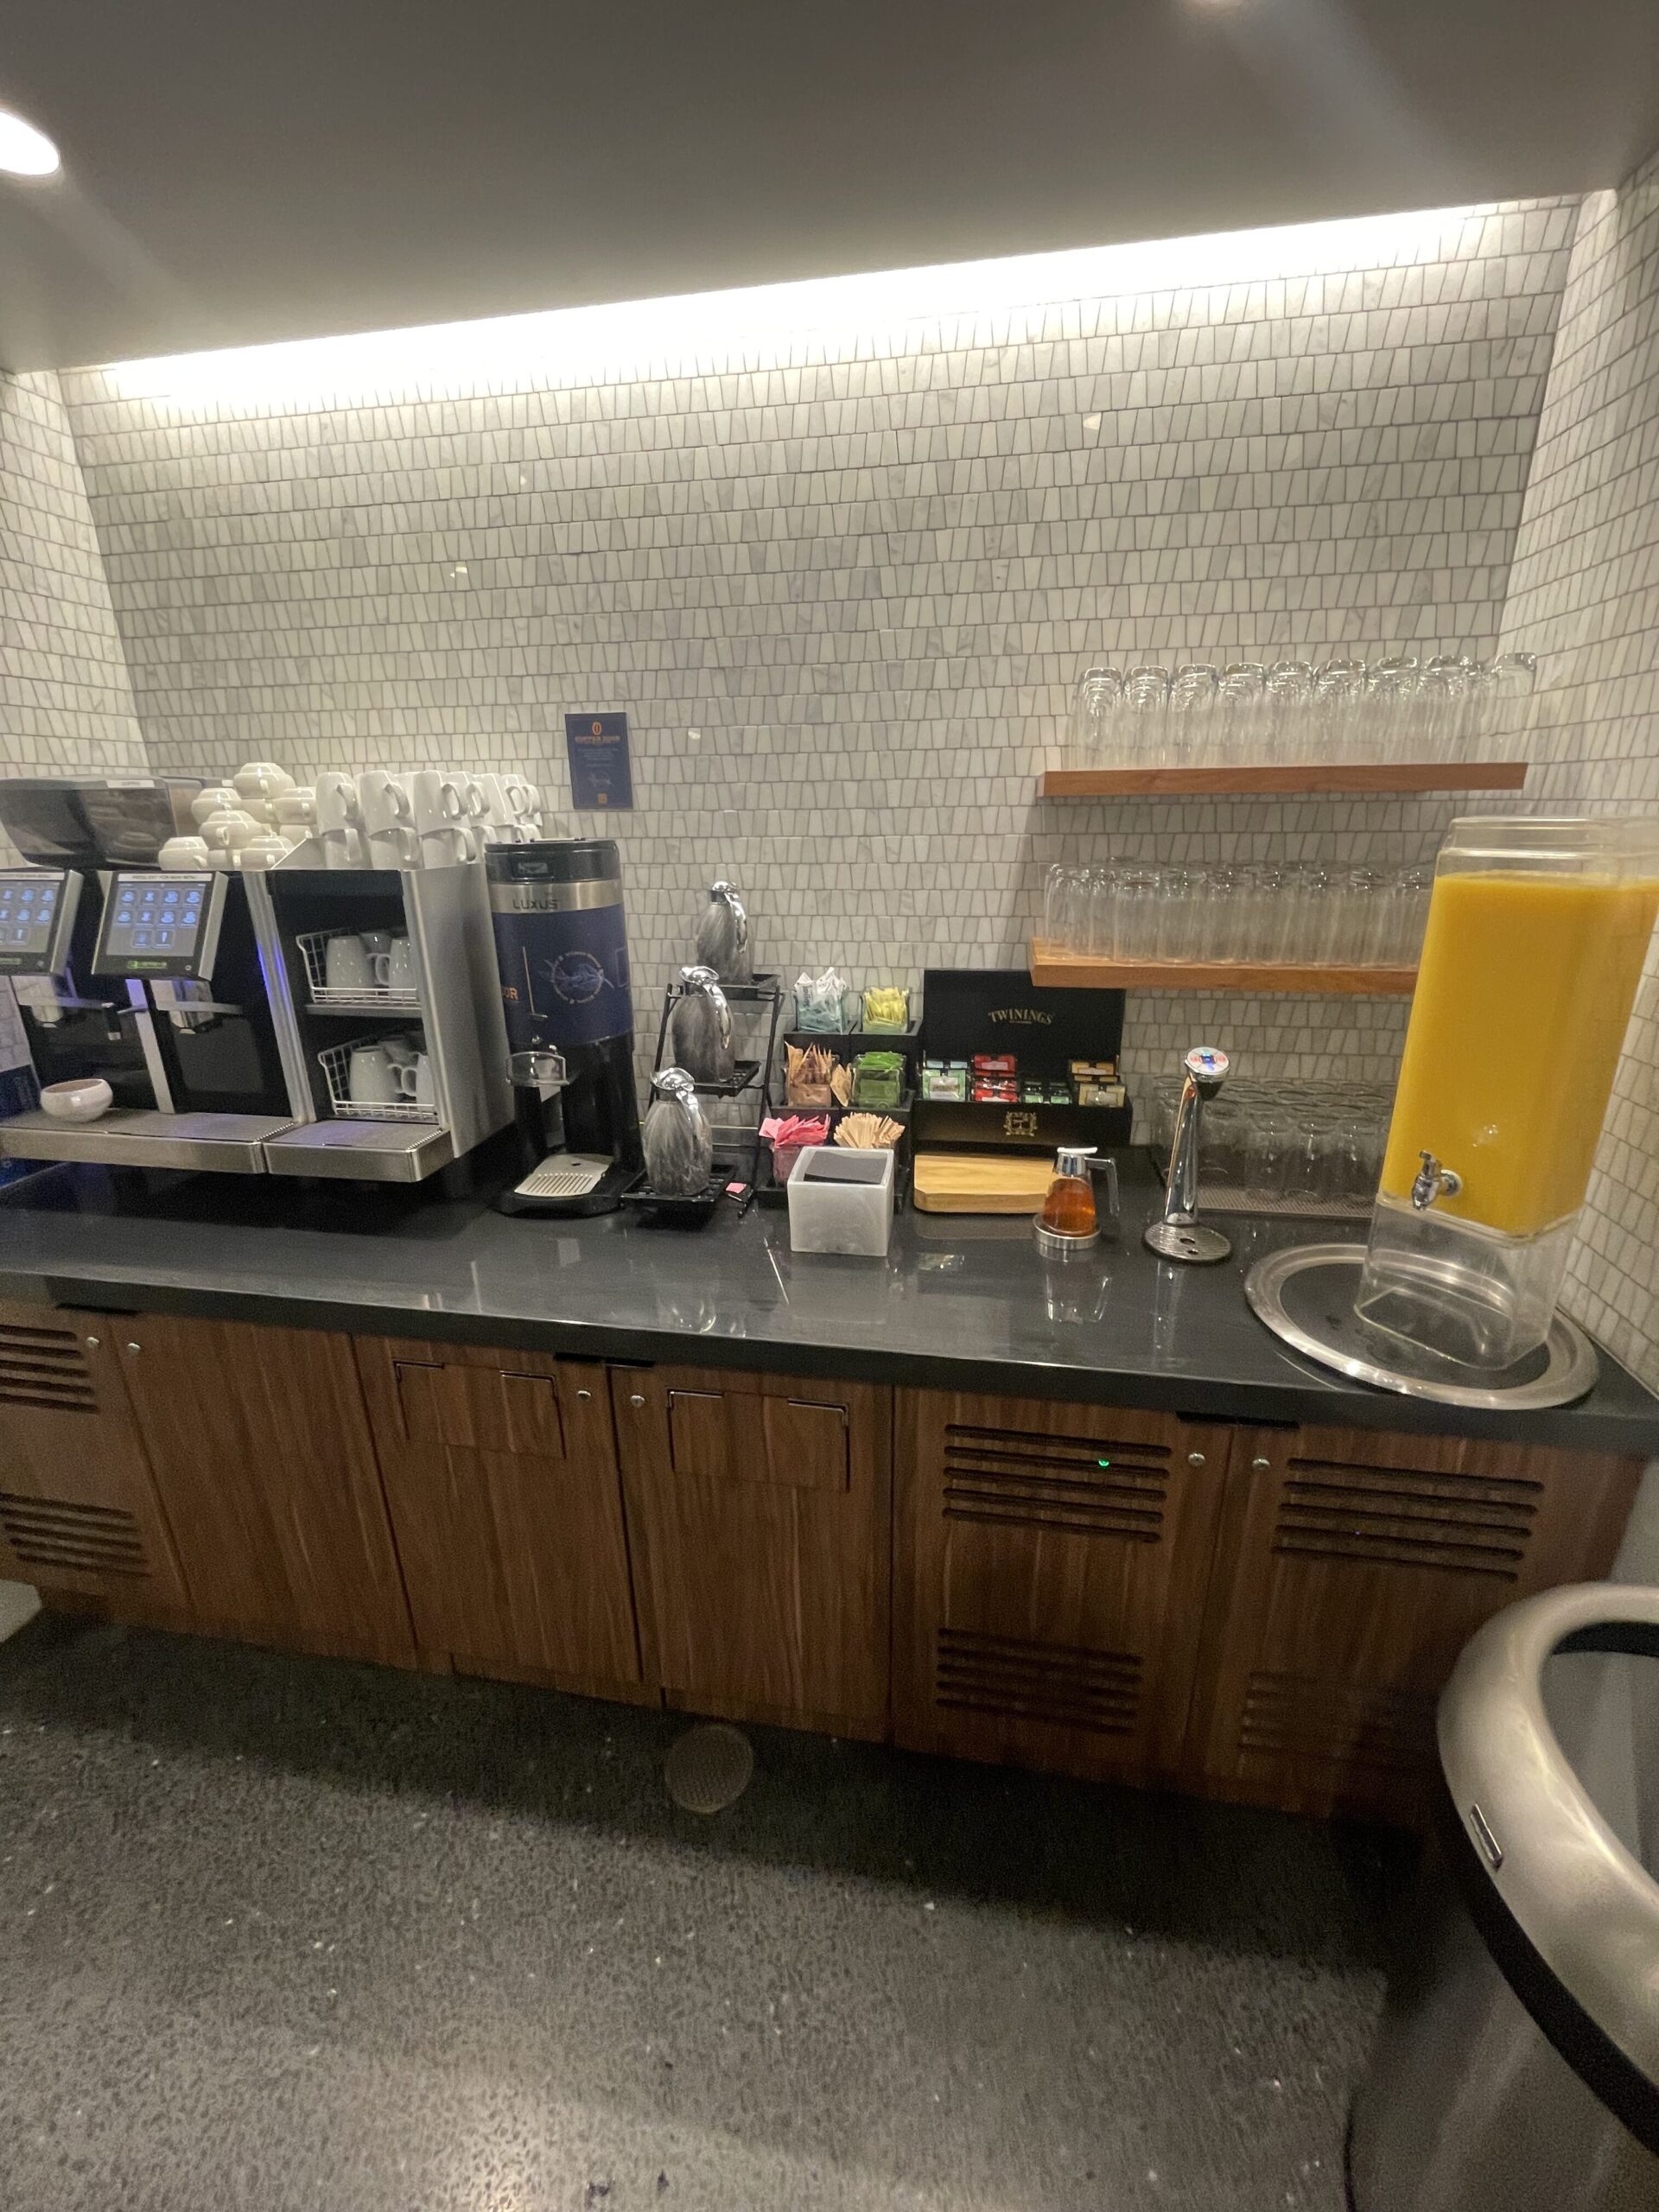 a coffee machine and juice dispenser on a counter